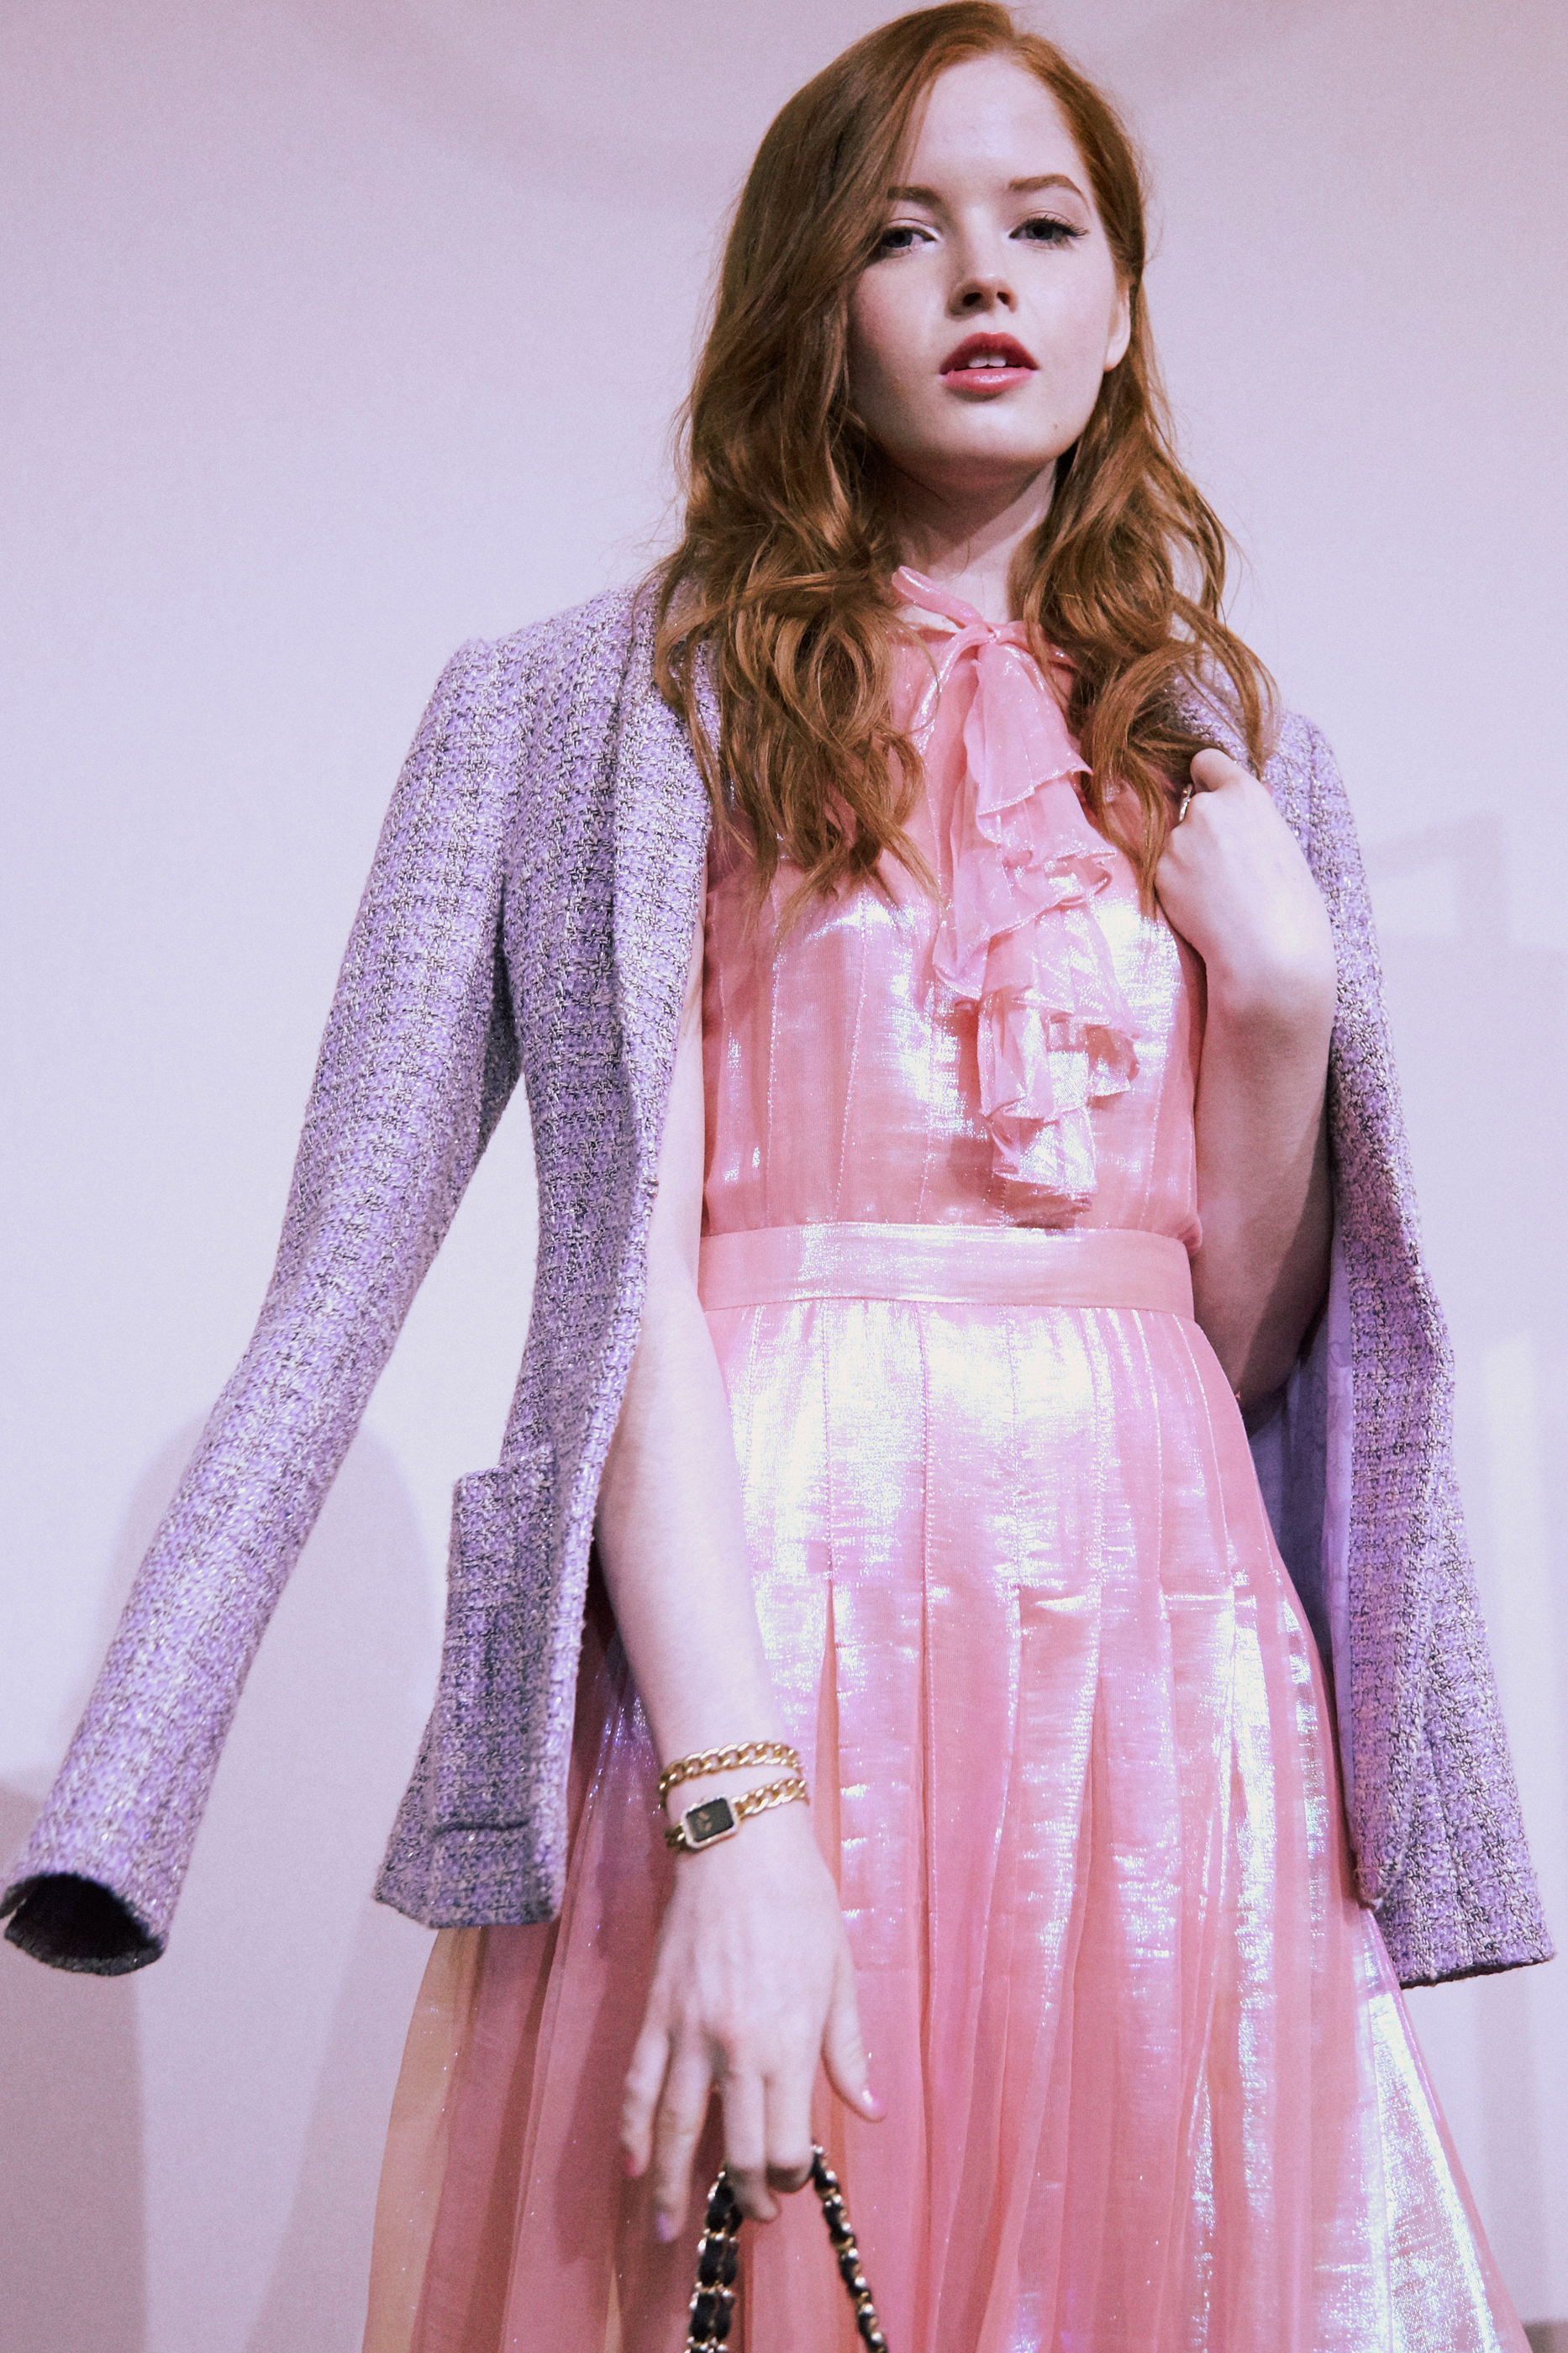 SS 16 HC_VIP Picture by Lea Colombo_Ellie BAMBER